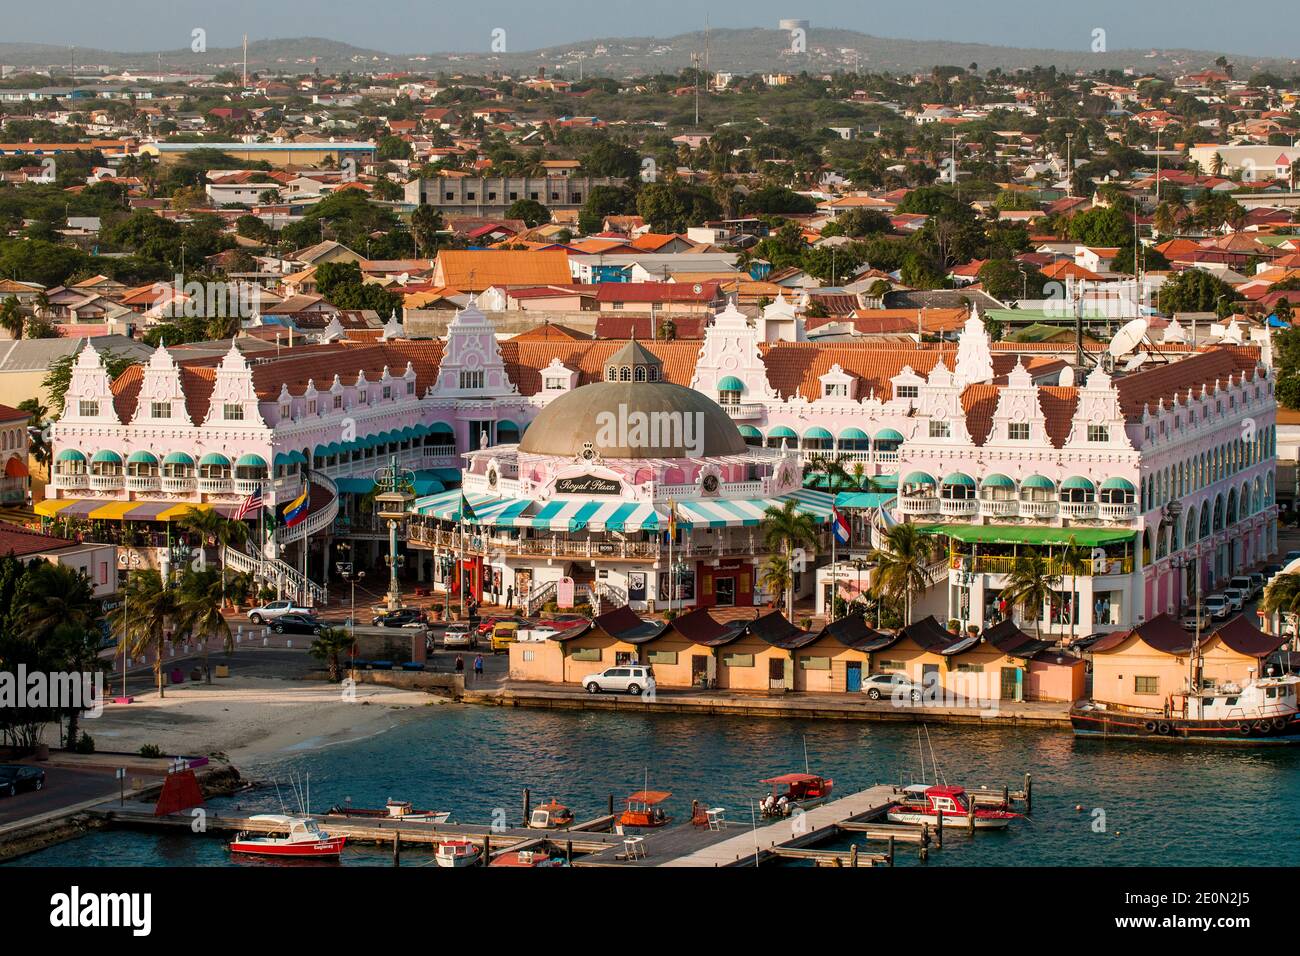 Aerial view of capital city Willemstad, Curacao. Stock Photo